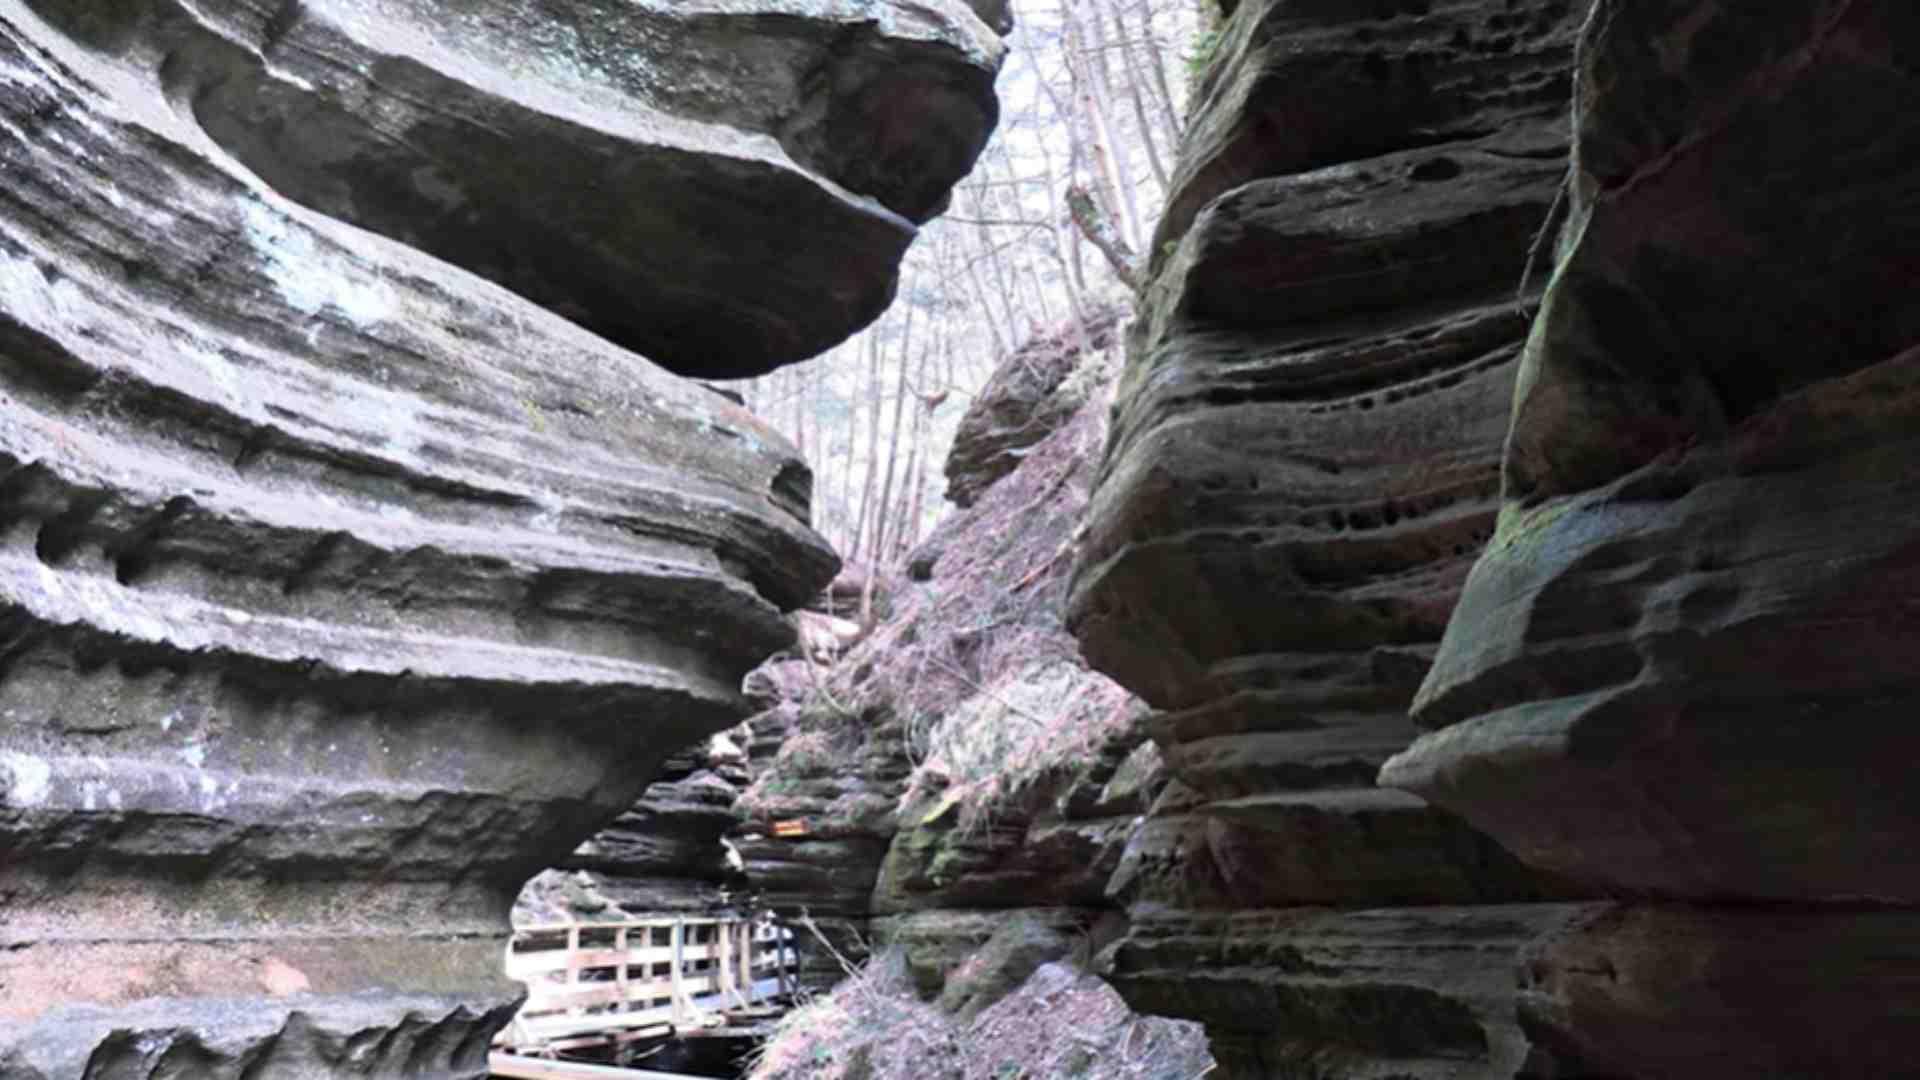 Why is Witches Gulch popular?